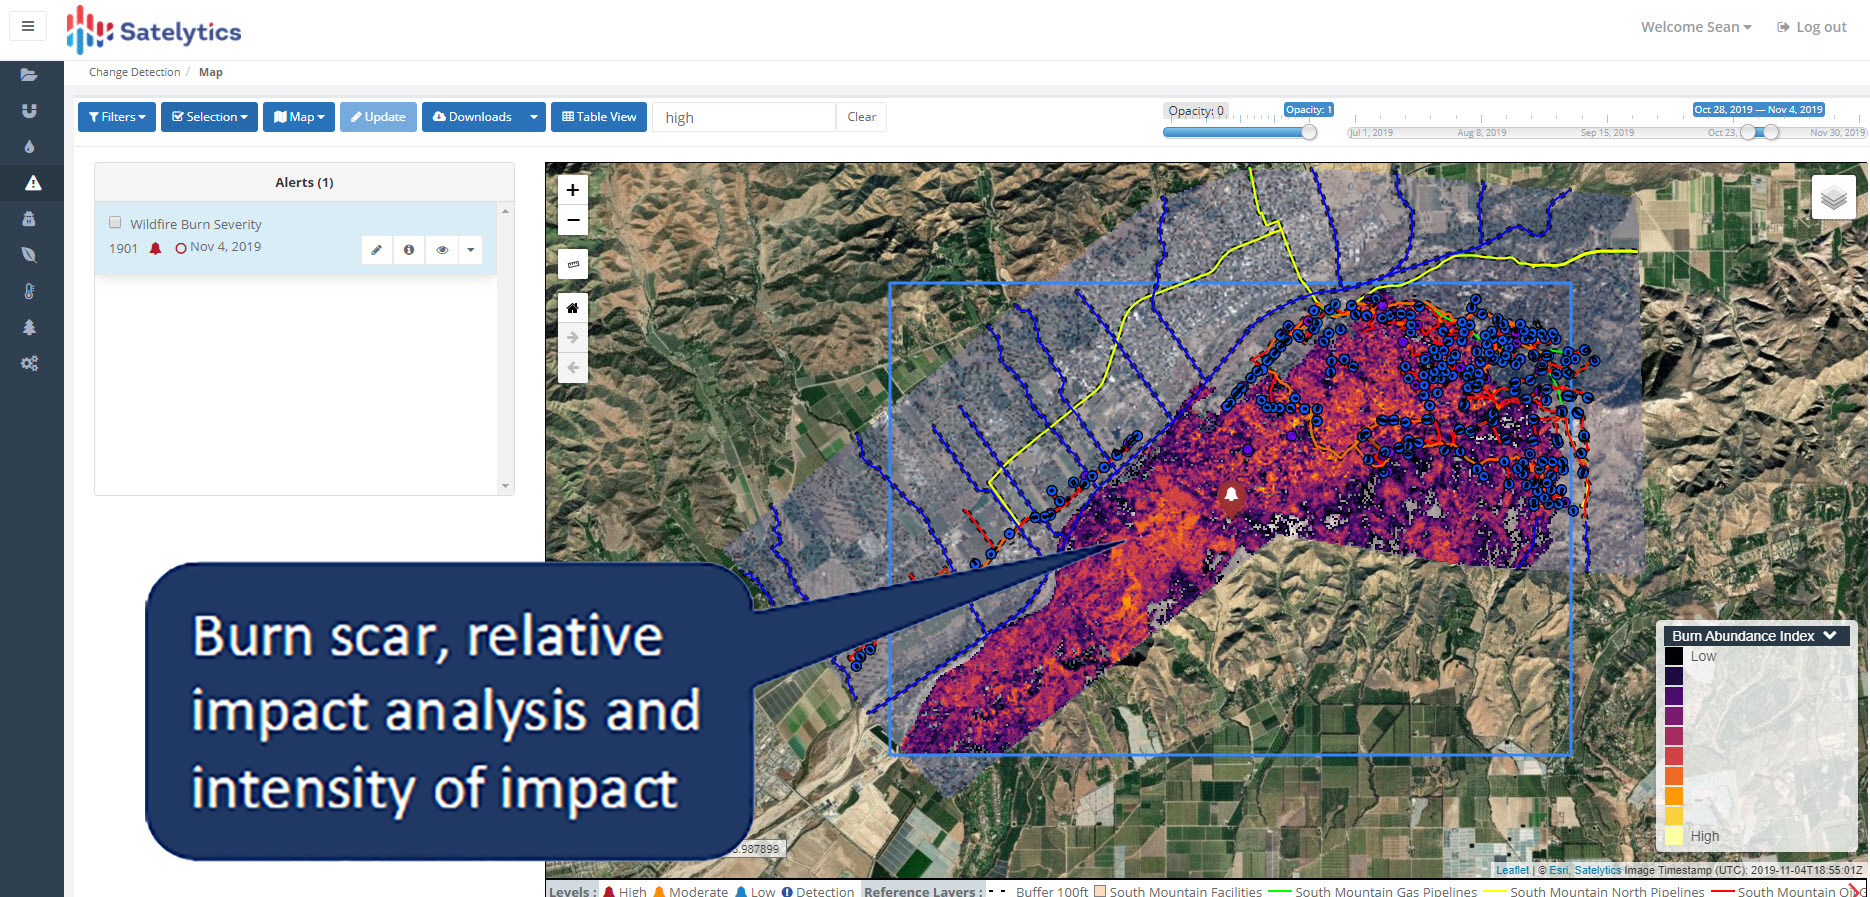 Satelytics helps you assess risks from wildfires.